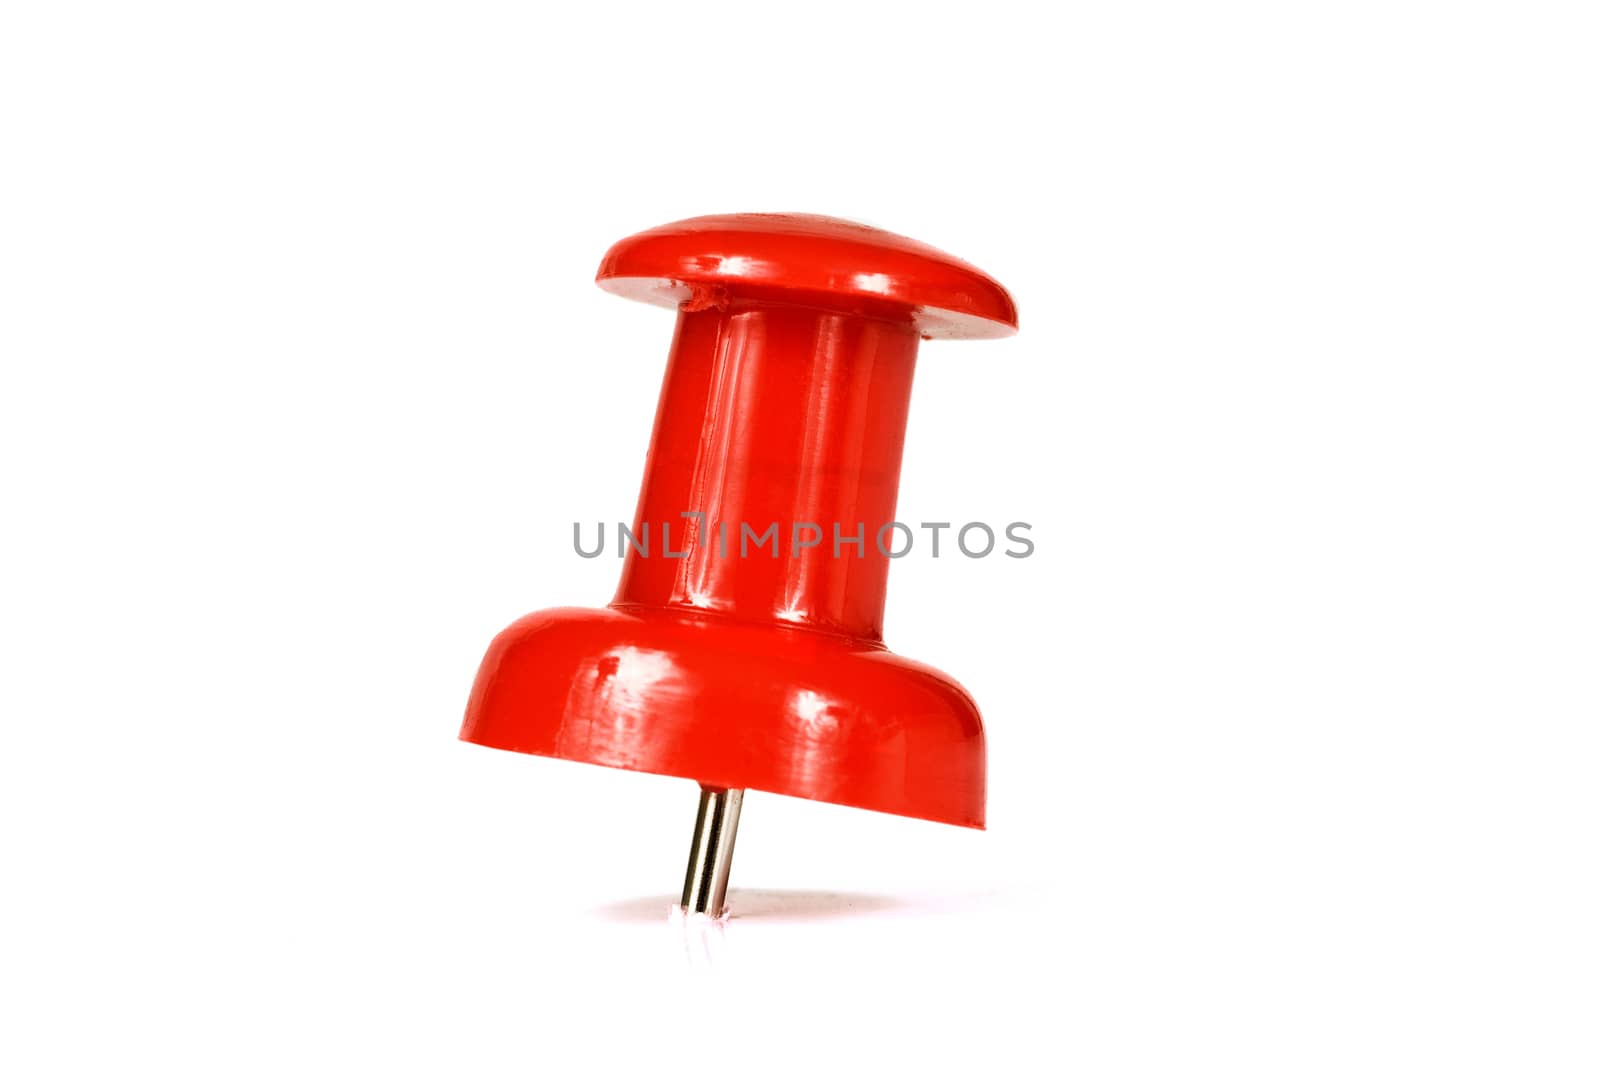 Red Pushpin Isolated On White Background by stockbuster1